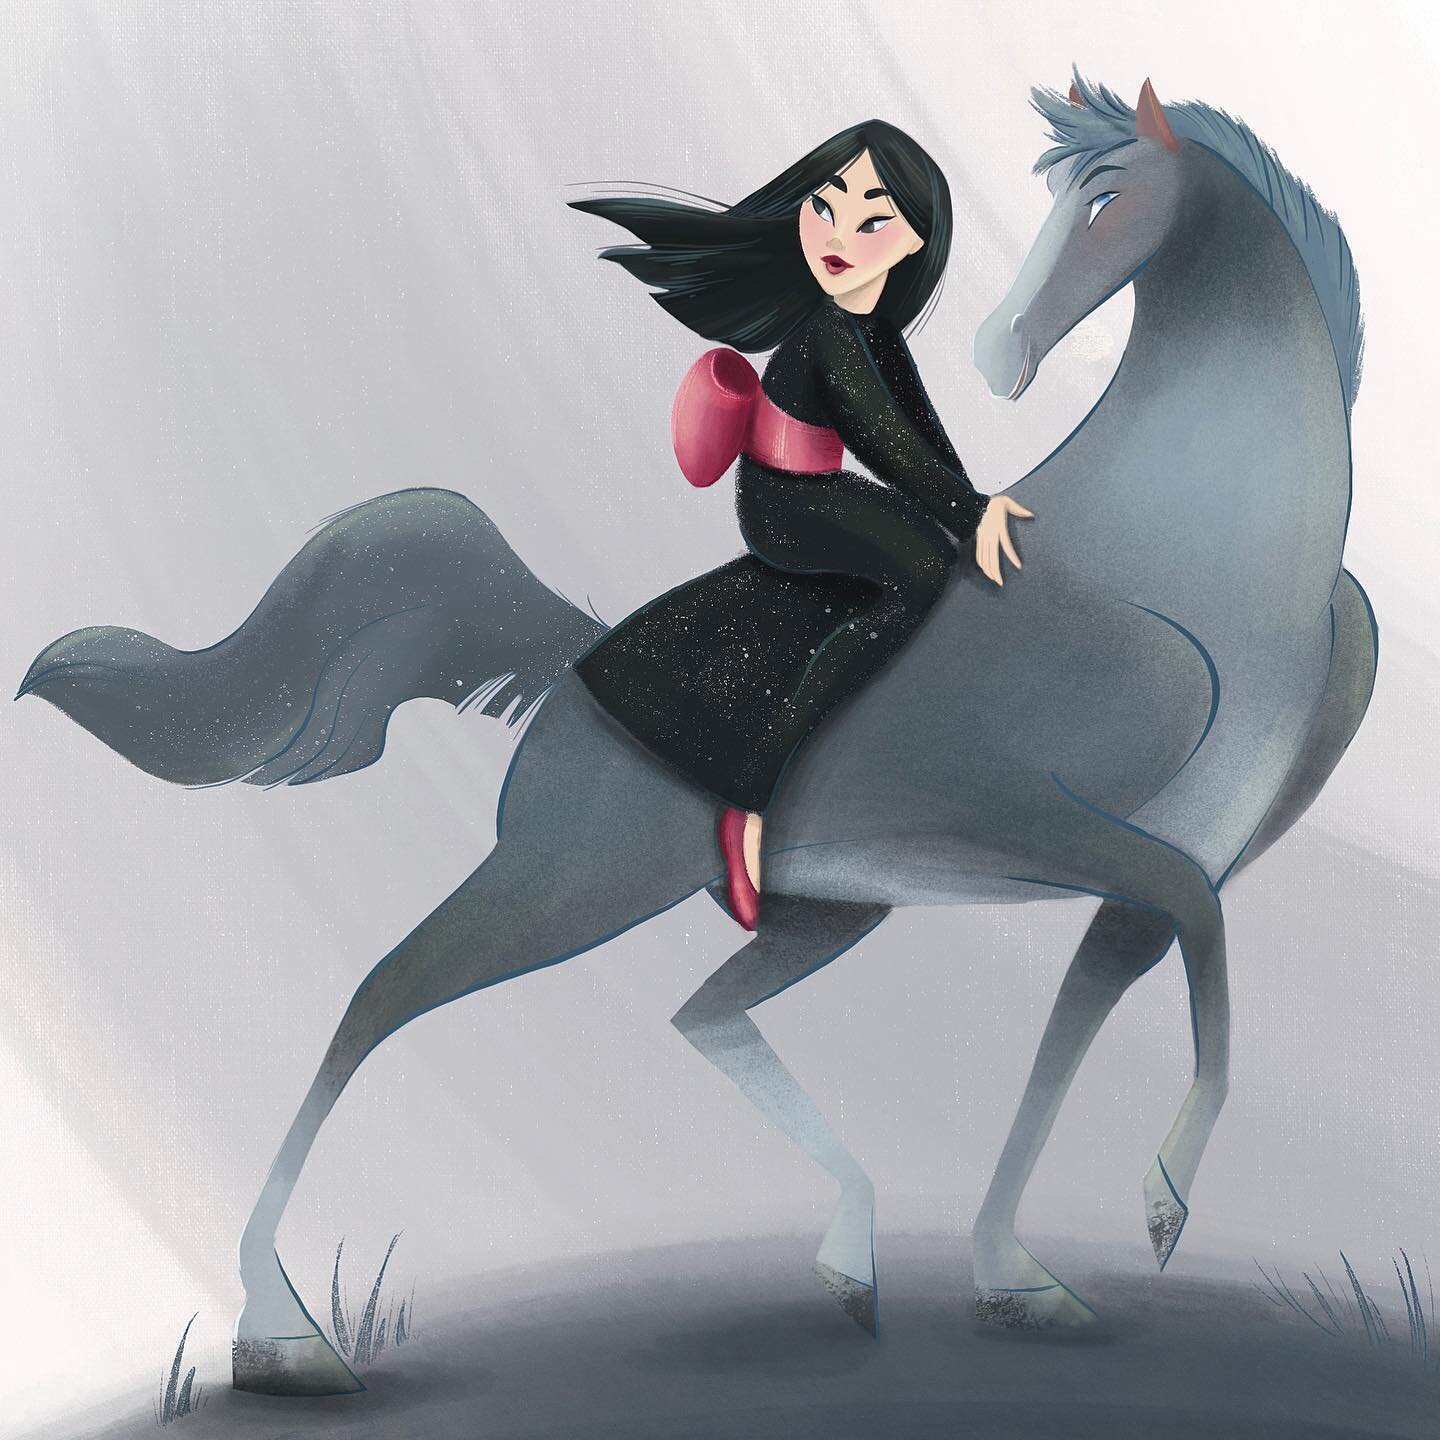 My version of Disney&rsquo;s Mulan and her honourable steed. 
Also wanted to try muted colours and grayscale tones it makes it a little more grown up I think, don&rsquo;t you?
🎀 
#happymidweek #nadineaydinart #disneysmulan #horse #horseriding #digit